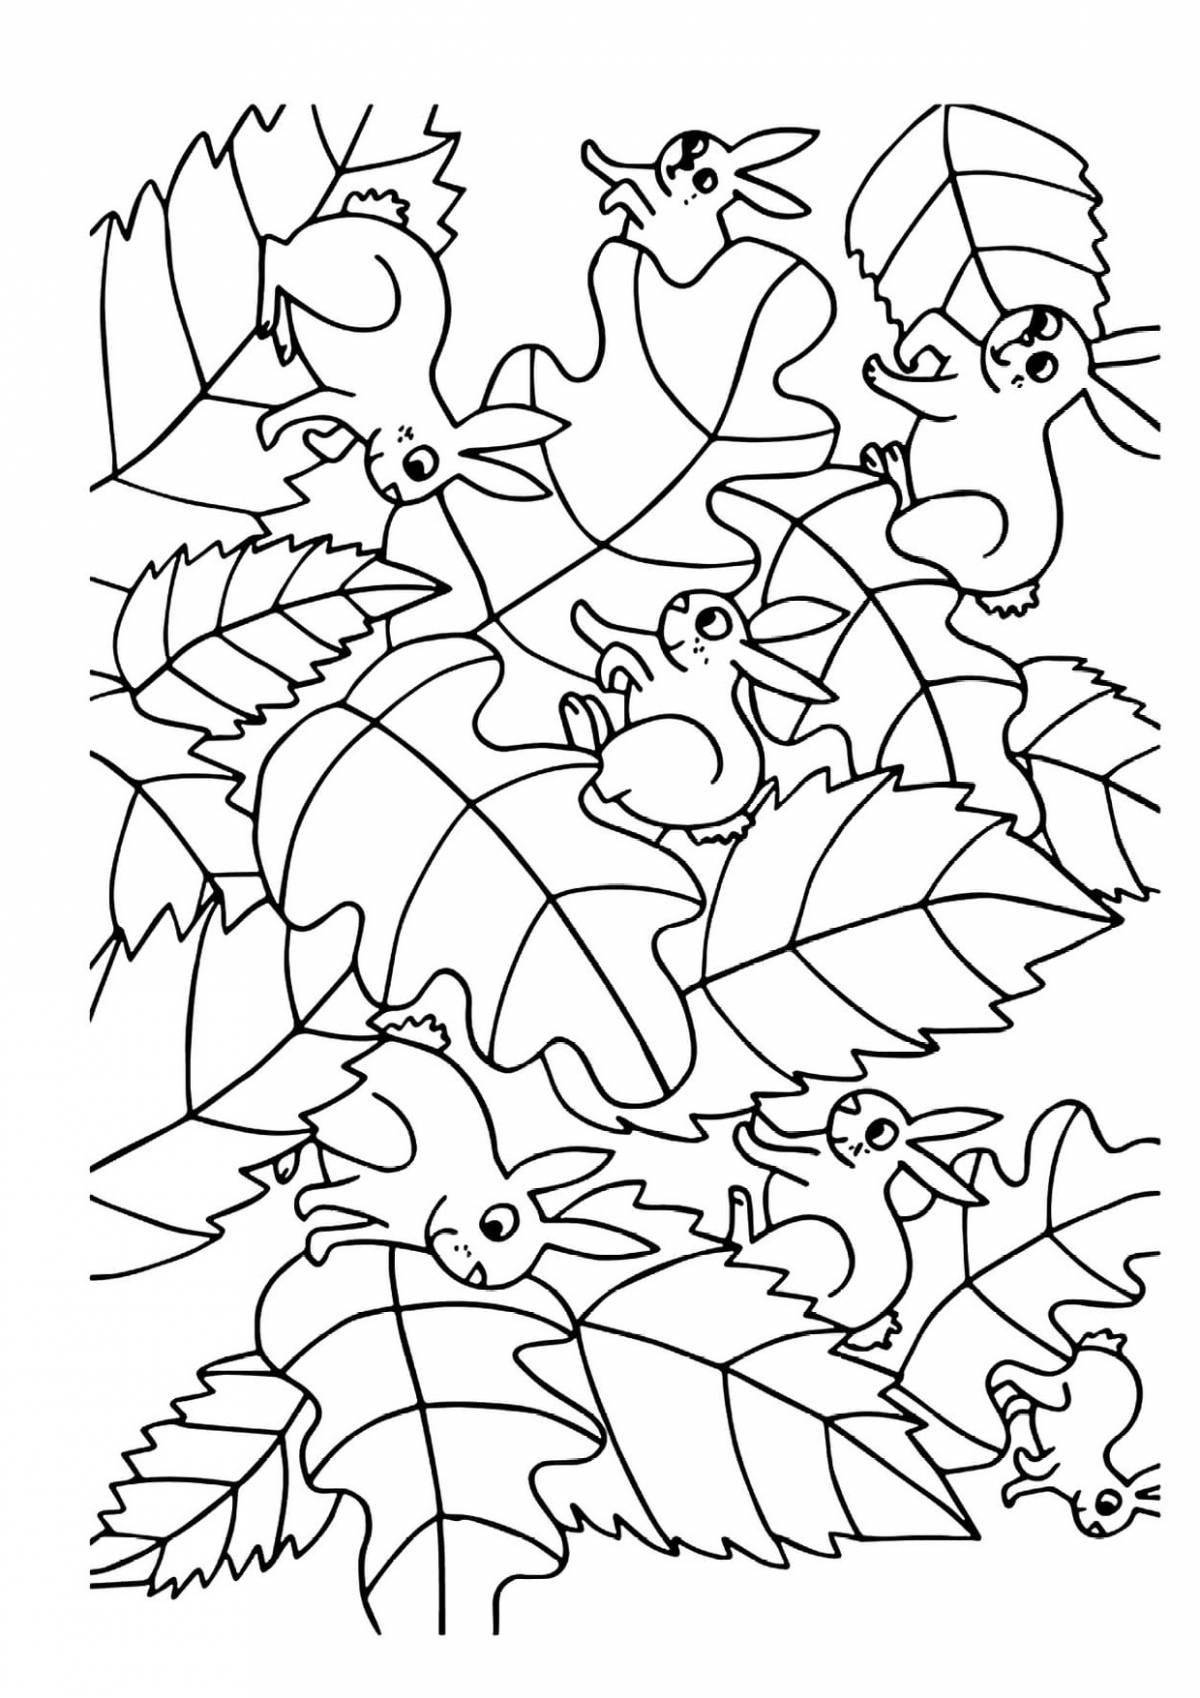 A playful autumn coloring book for 3-4 year olds